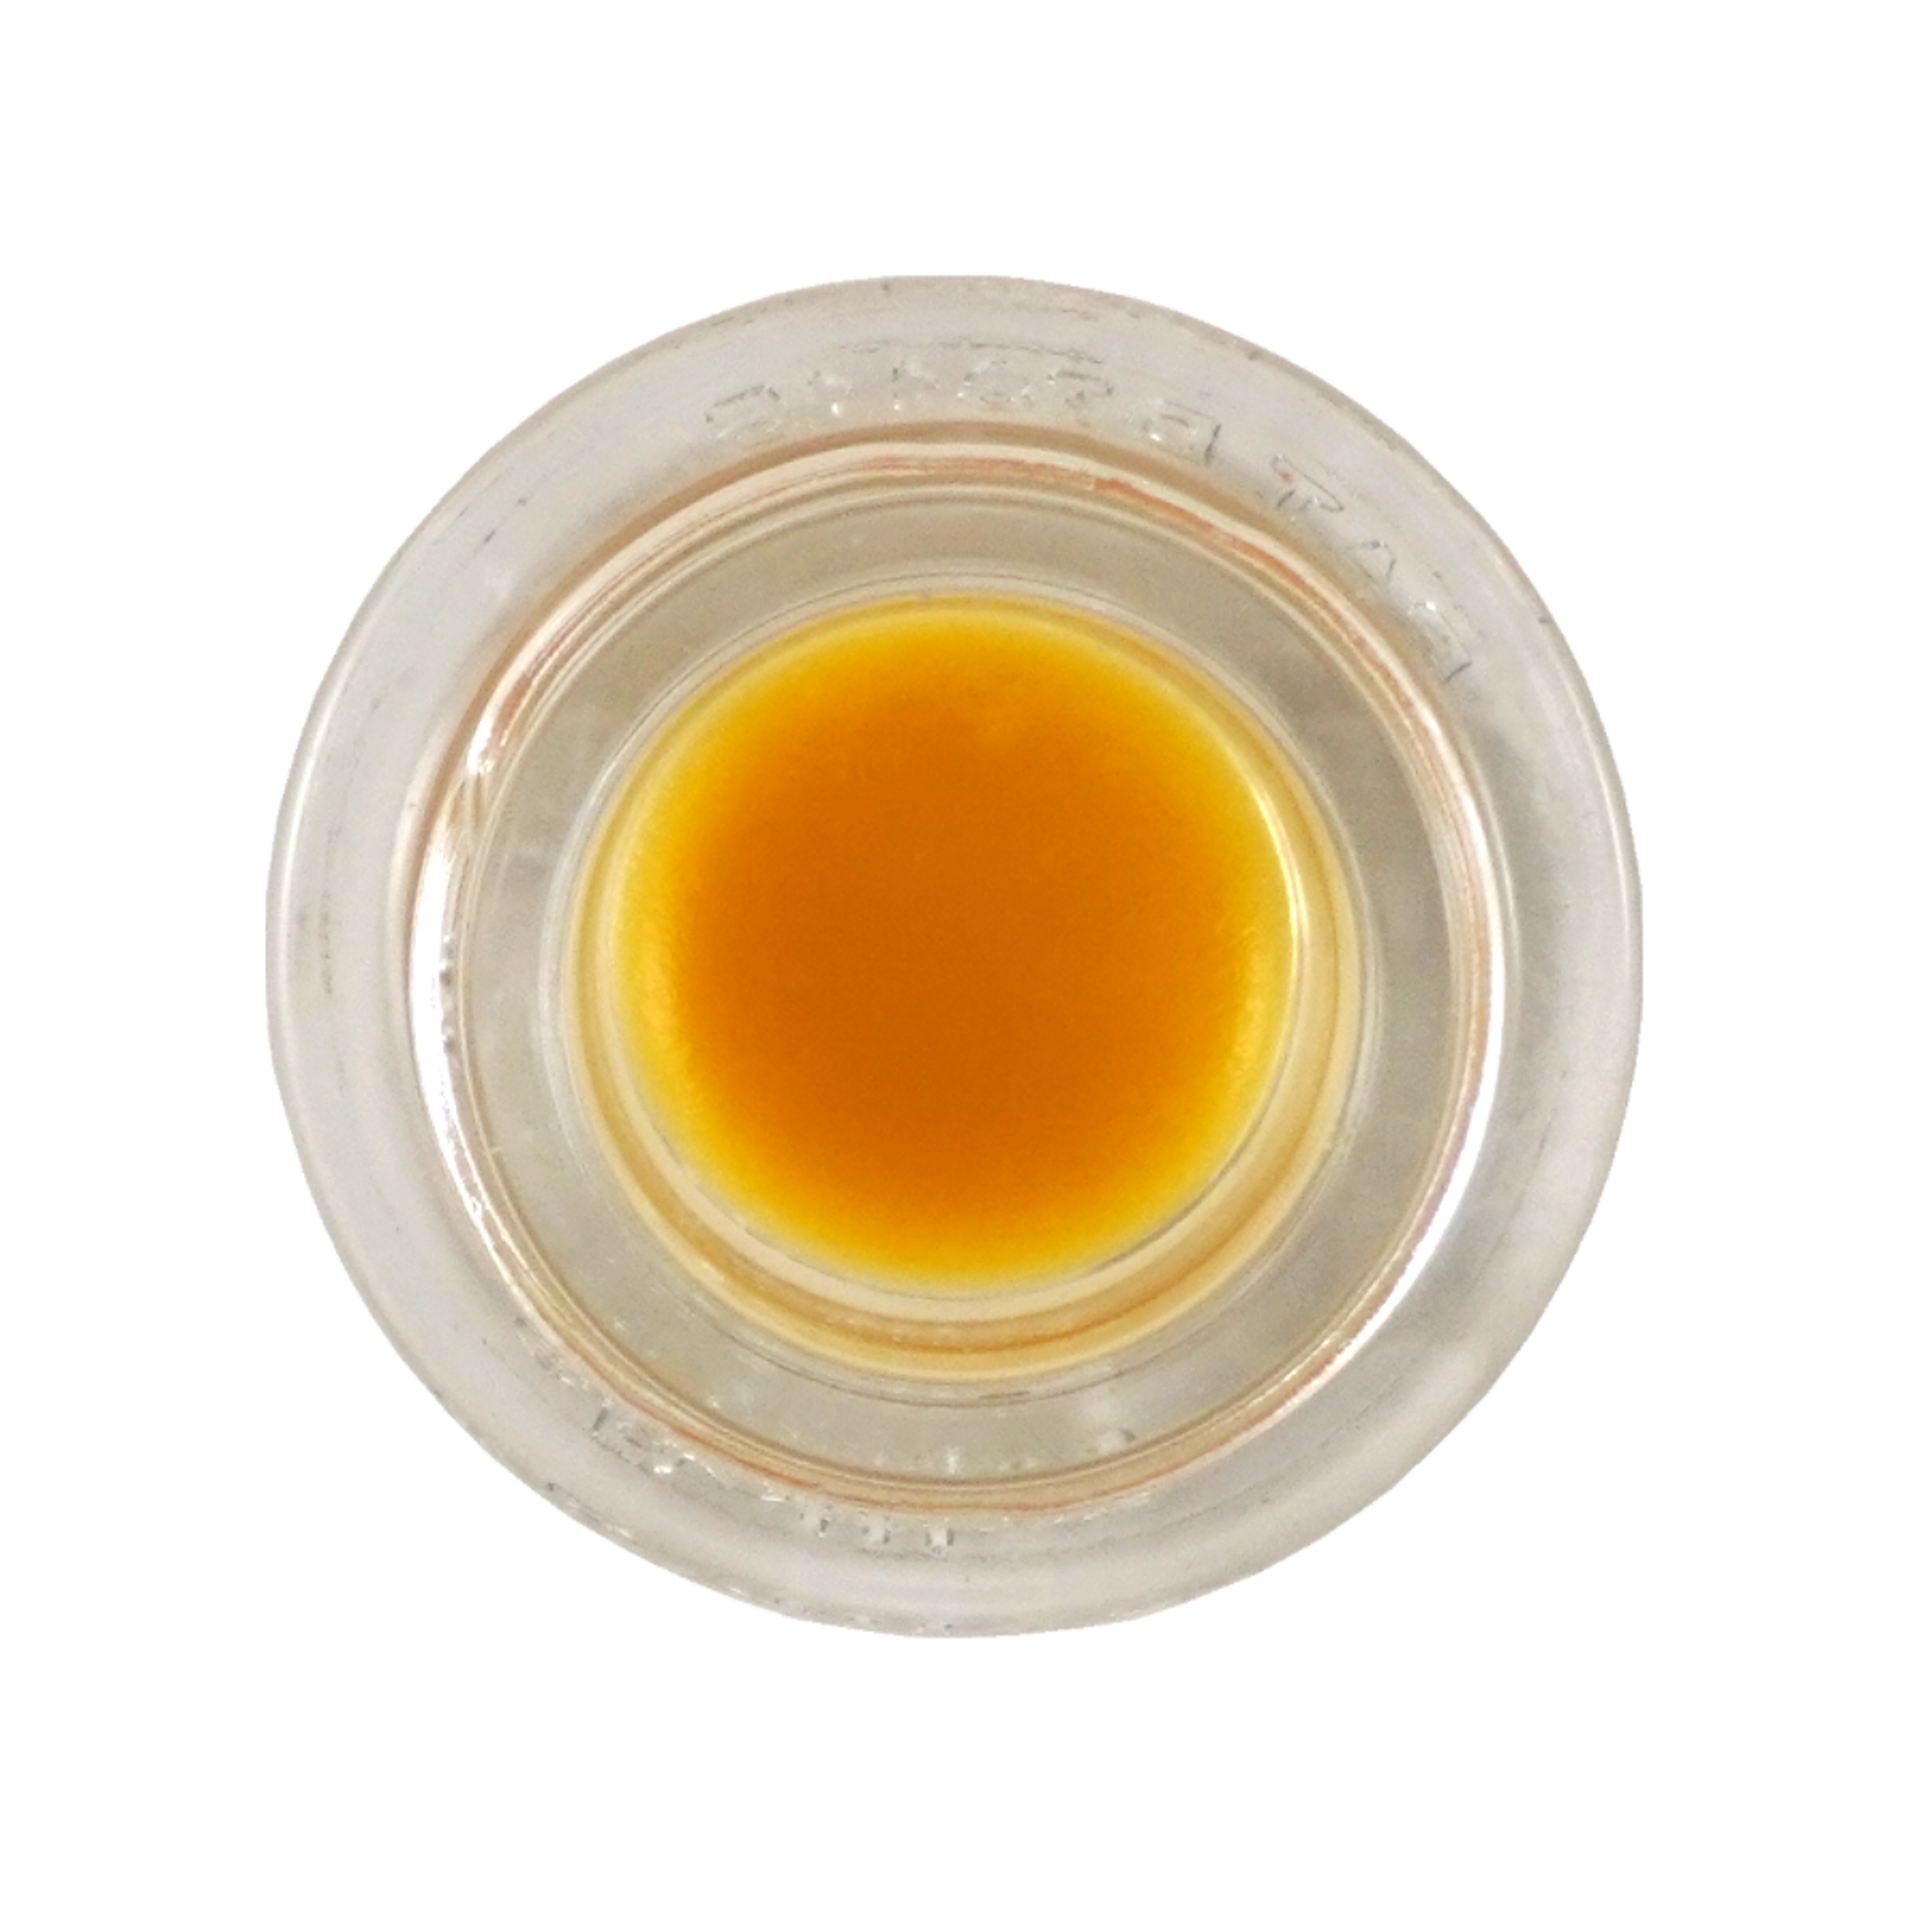 Shaman's Syrup Live Resin 1g